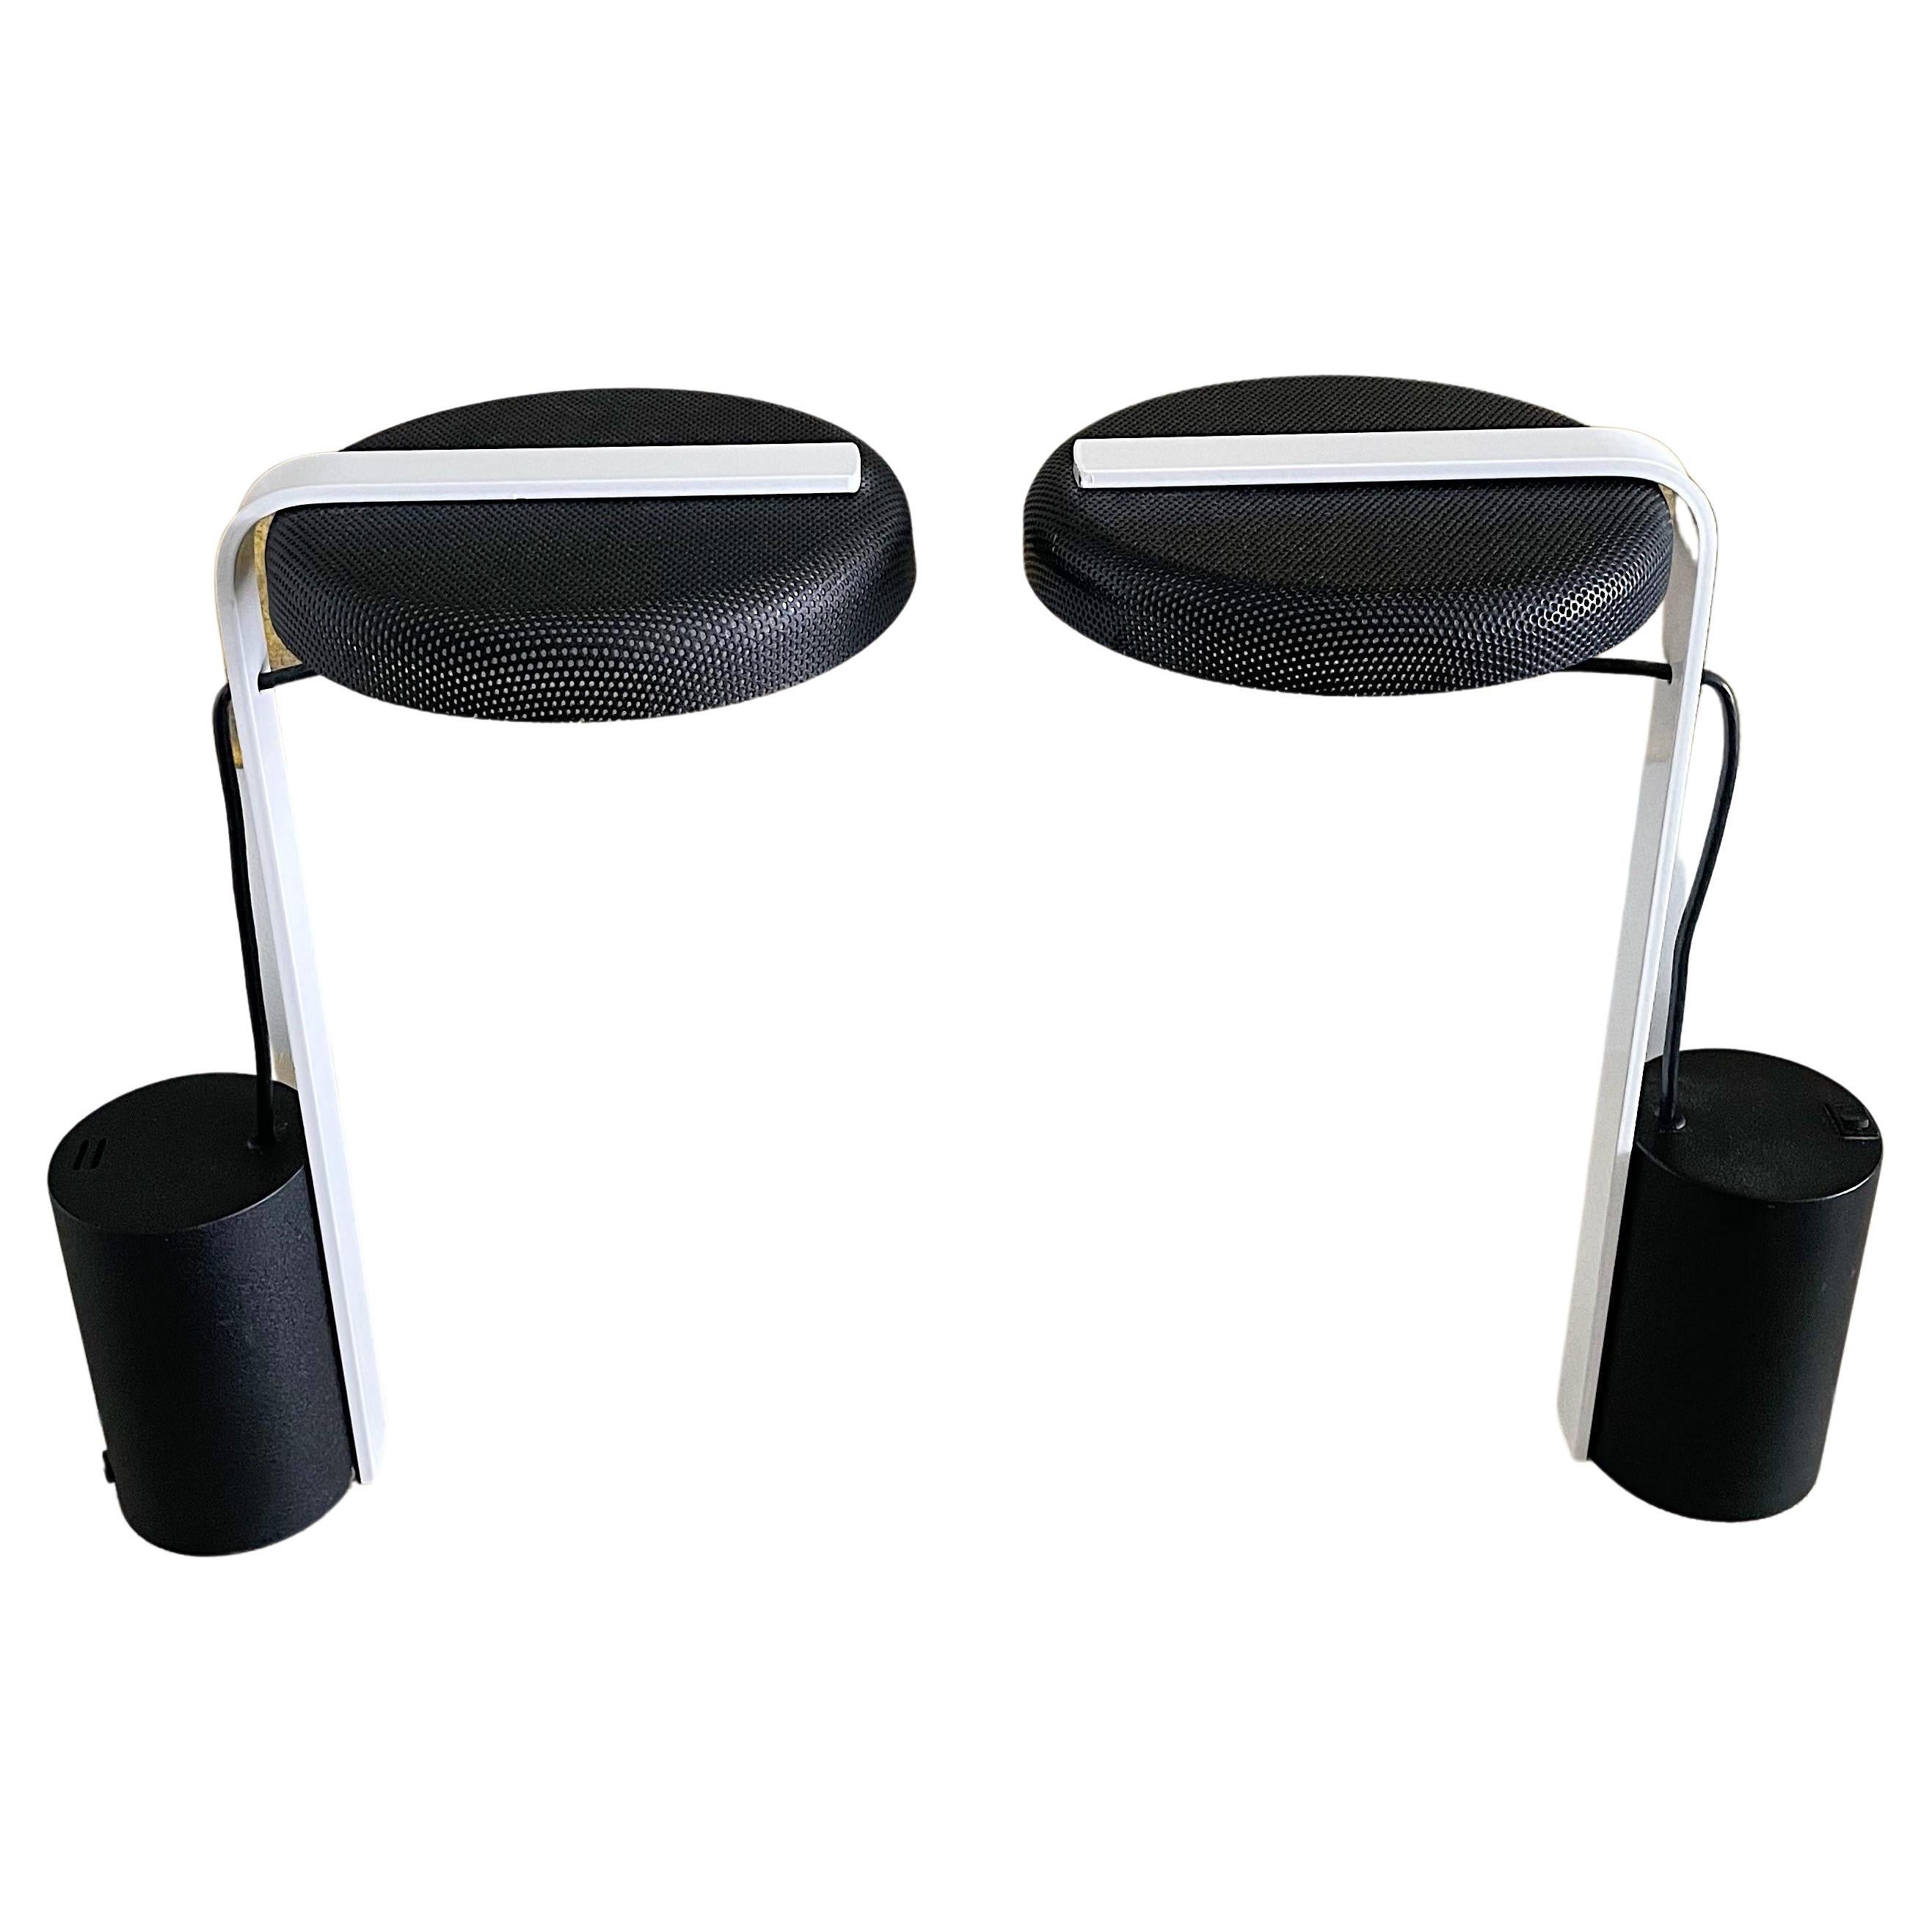 Ron Rezek 110 Desk Lamps in Black and White Signed